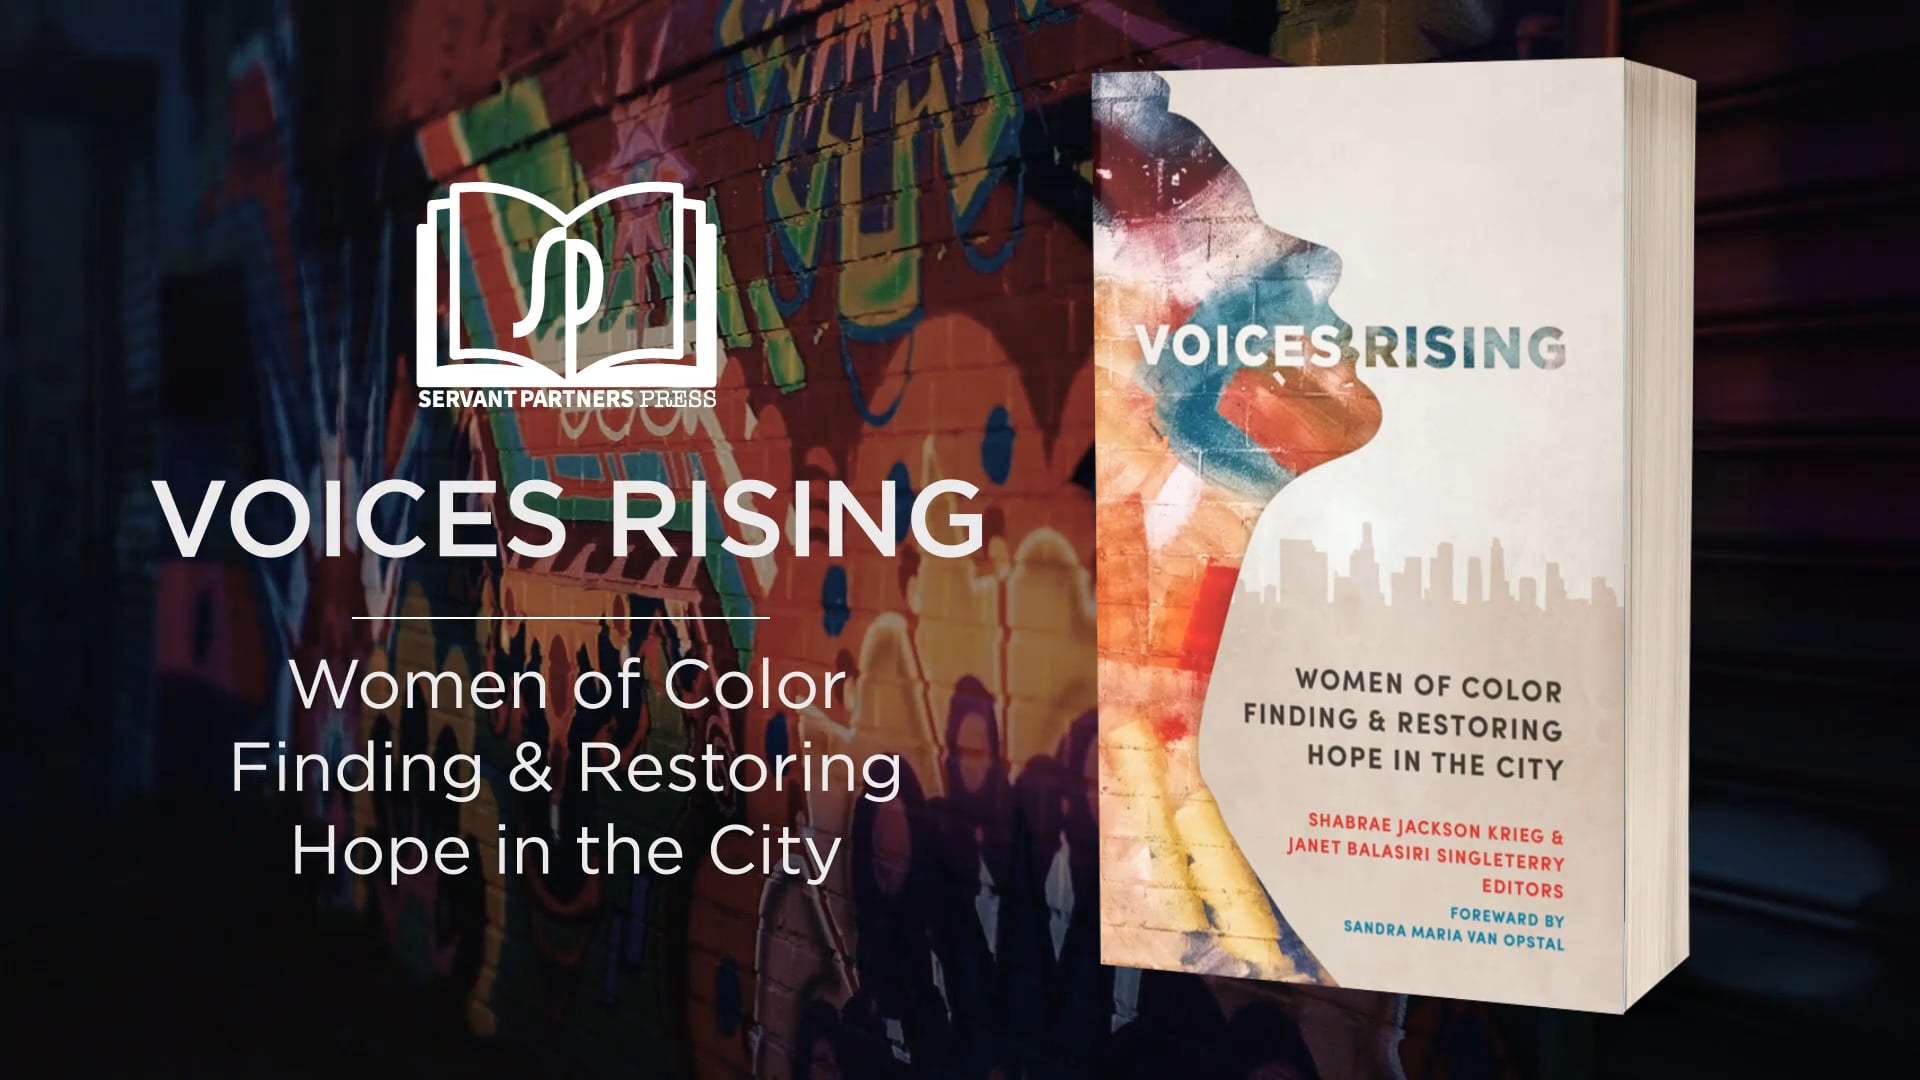 Voices Rising: Women of Color Finding & Restoring Hope in the City